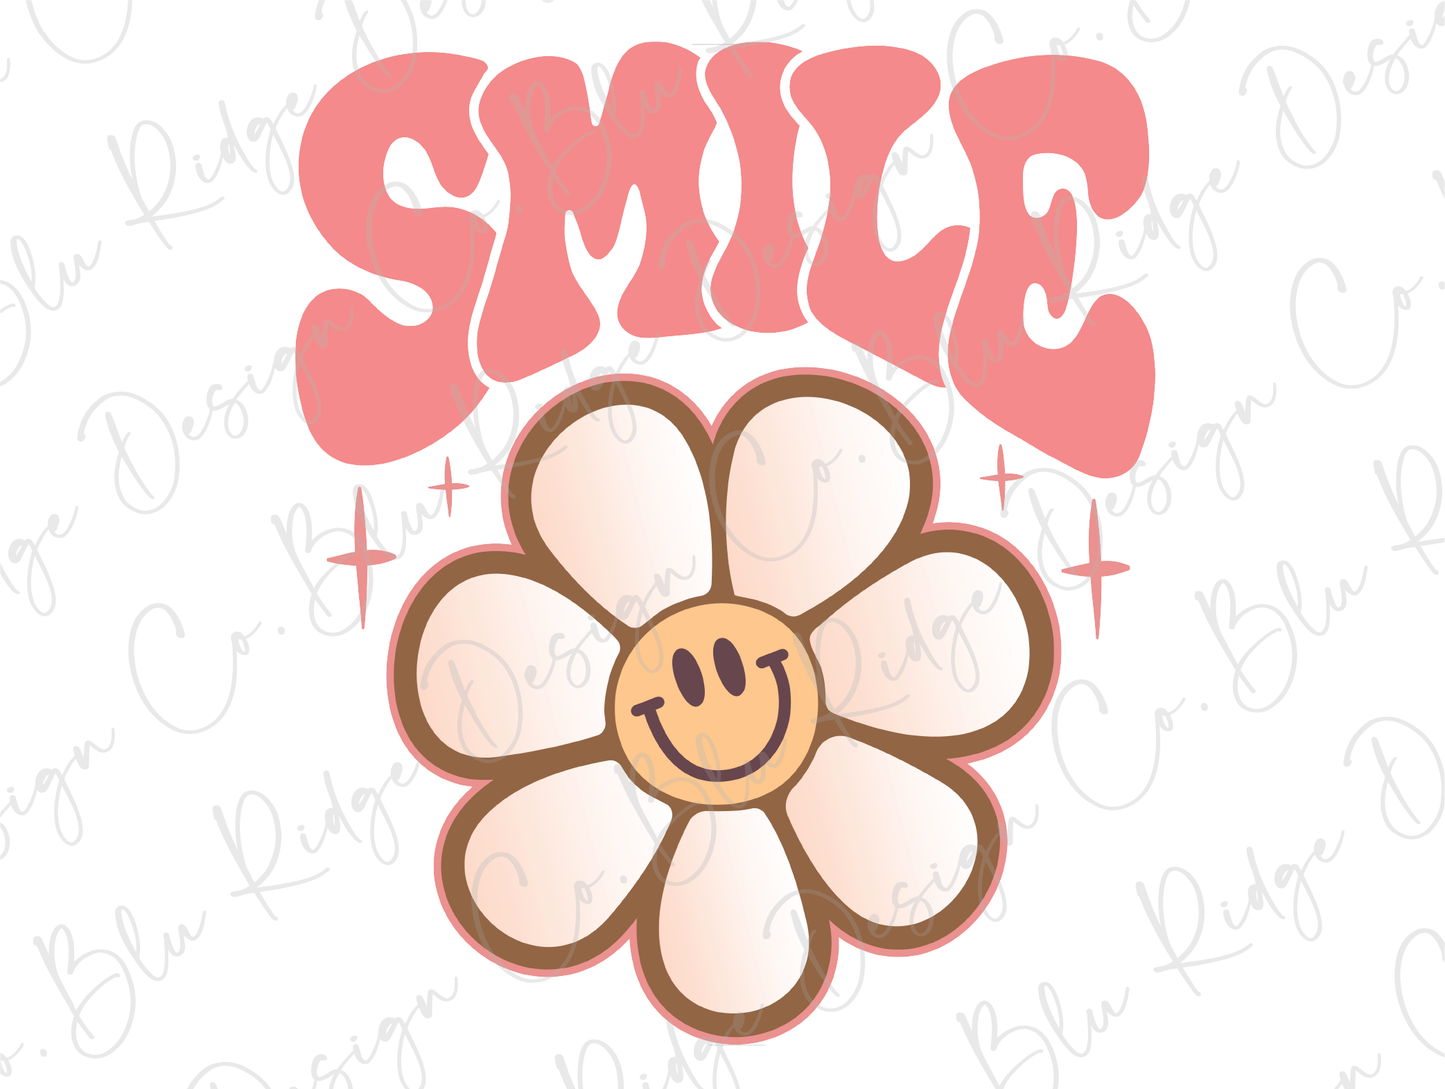 Groovy Smile Daisy Retro Smiling Daisy Flower Design Direct to Film (DTF) Transfer